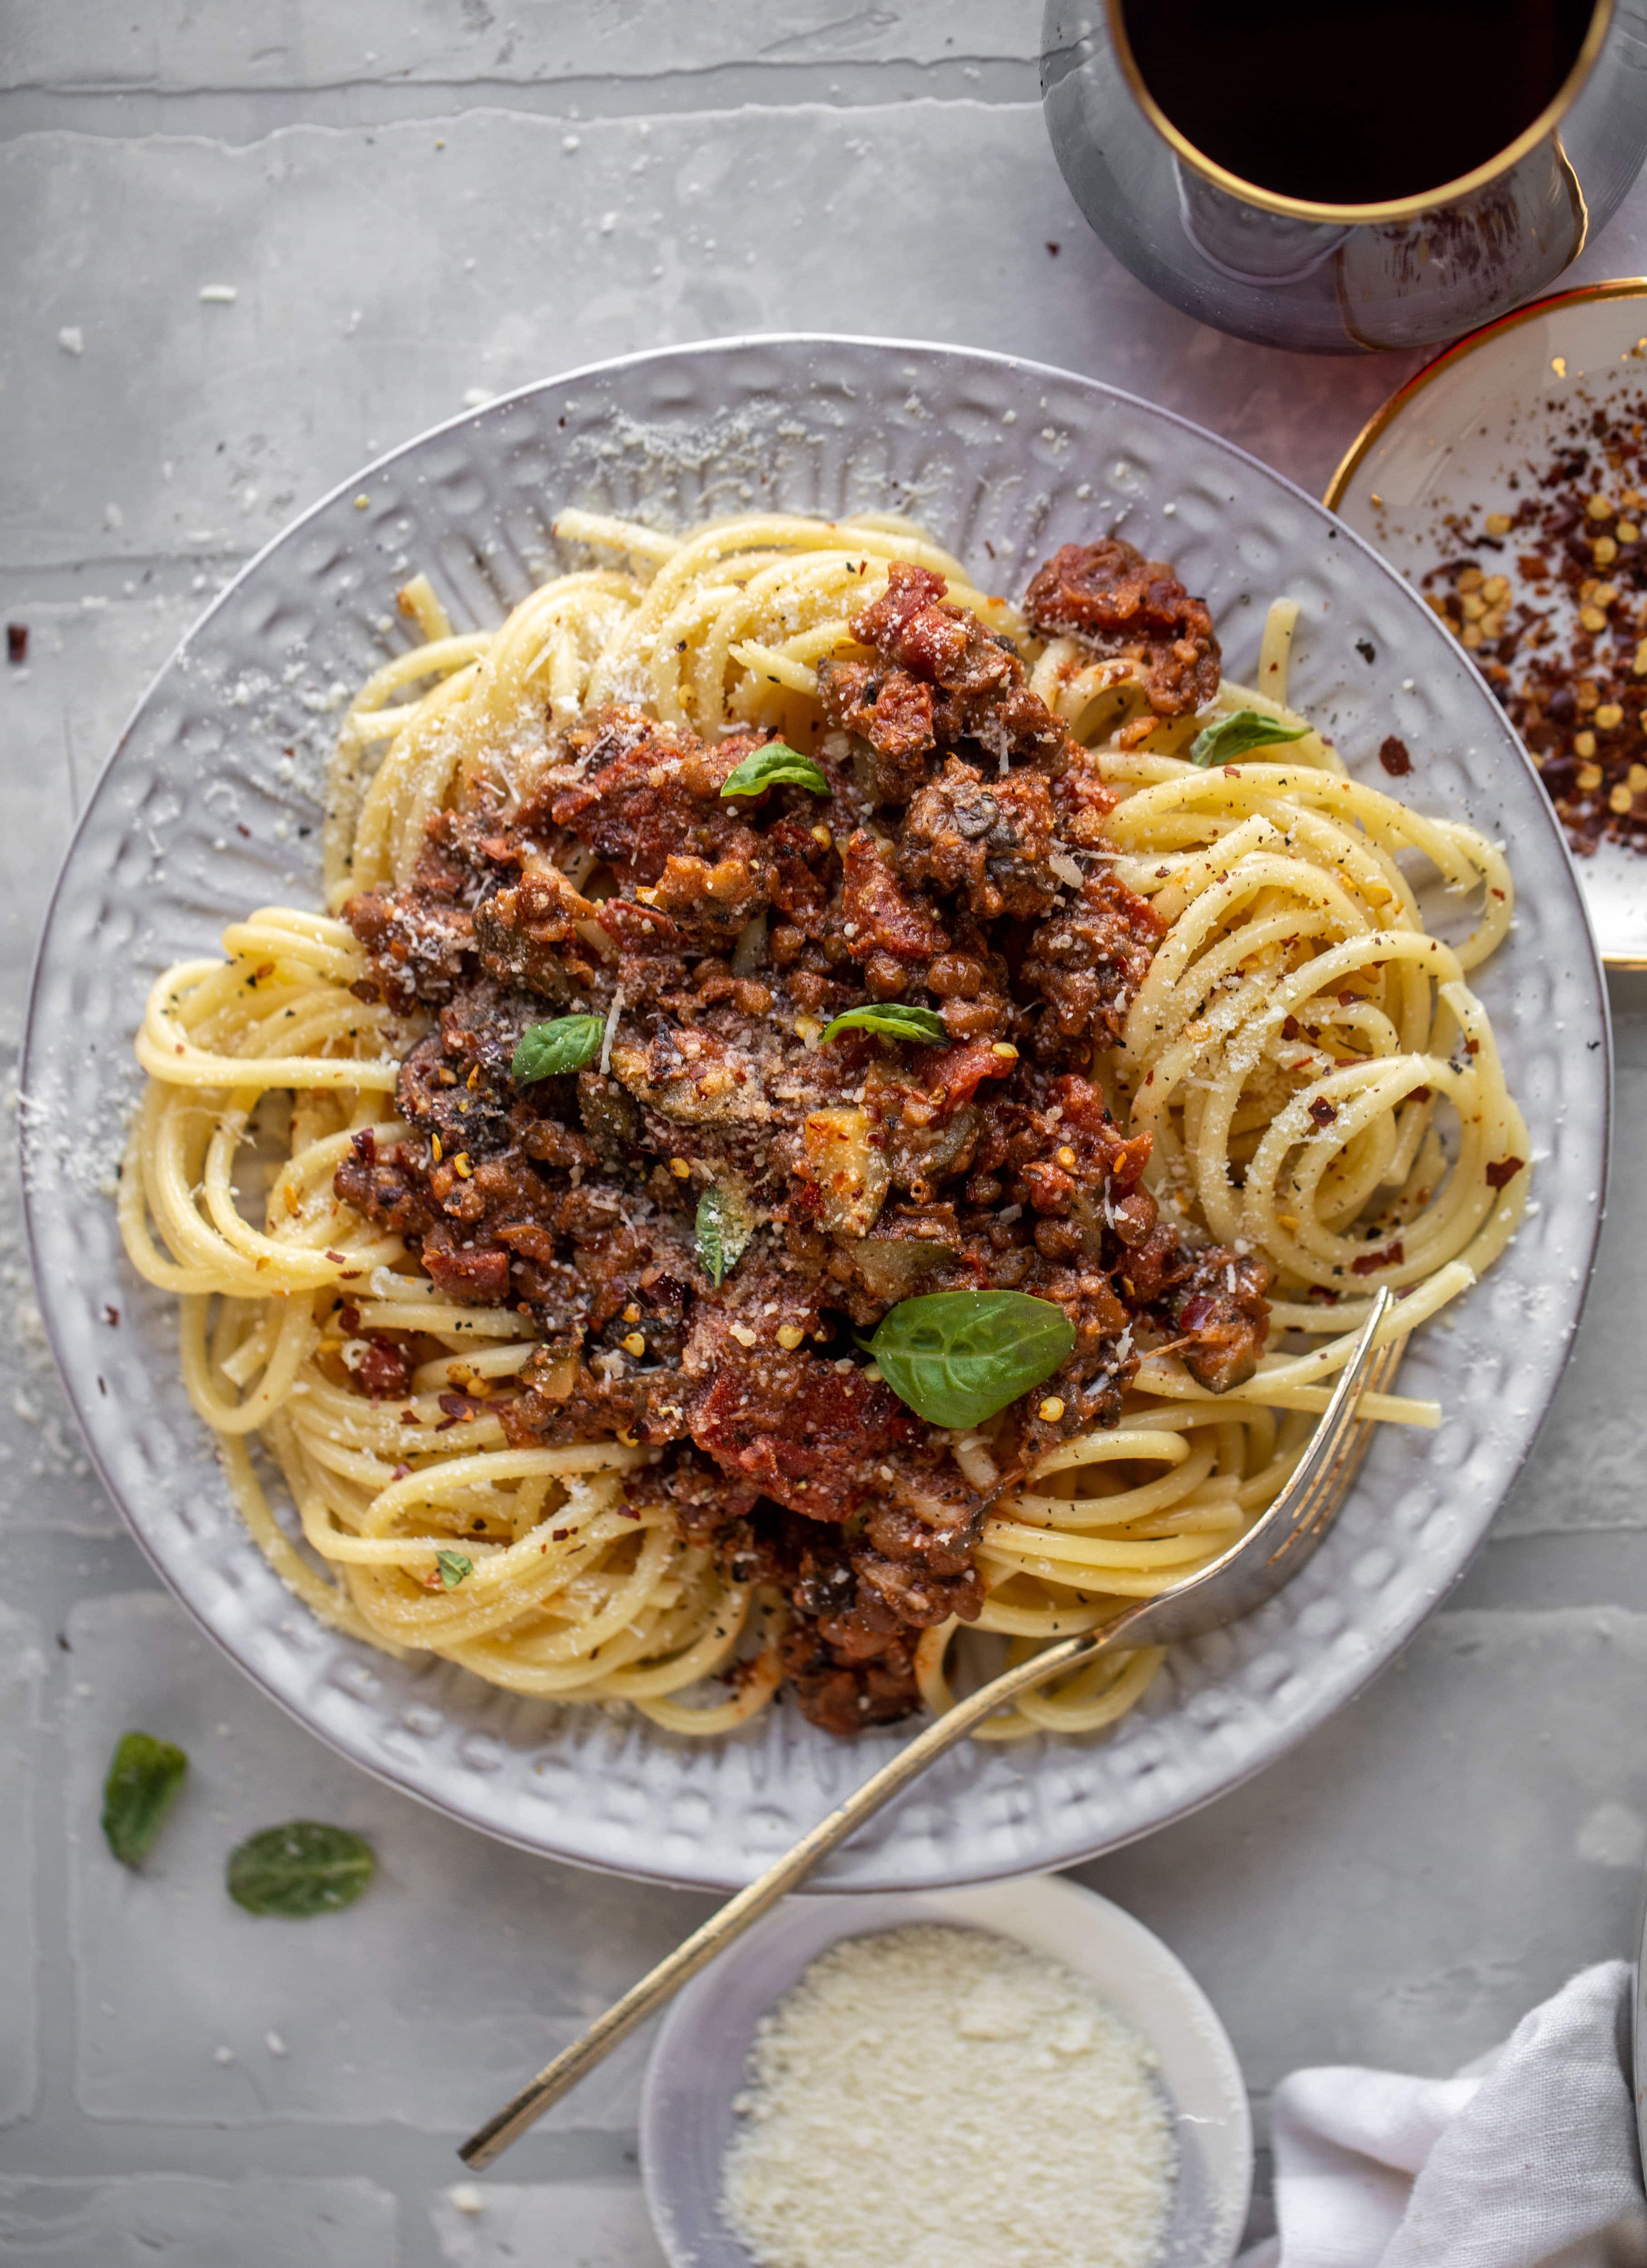 This lentil bolognese is incredible! Super hearty, loaded with vegetables, saucy, rich and decadent. You won't even miss the meat!